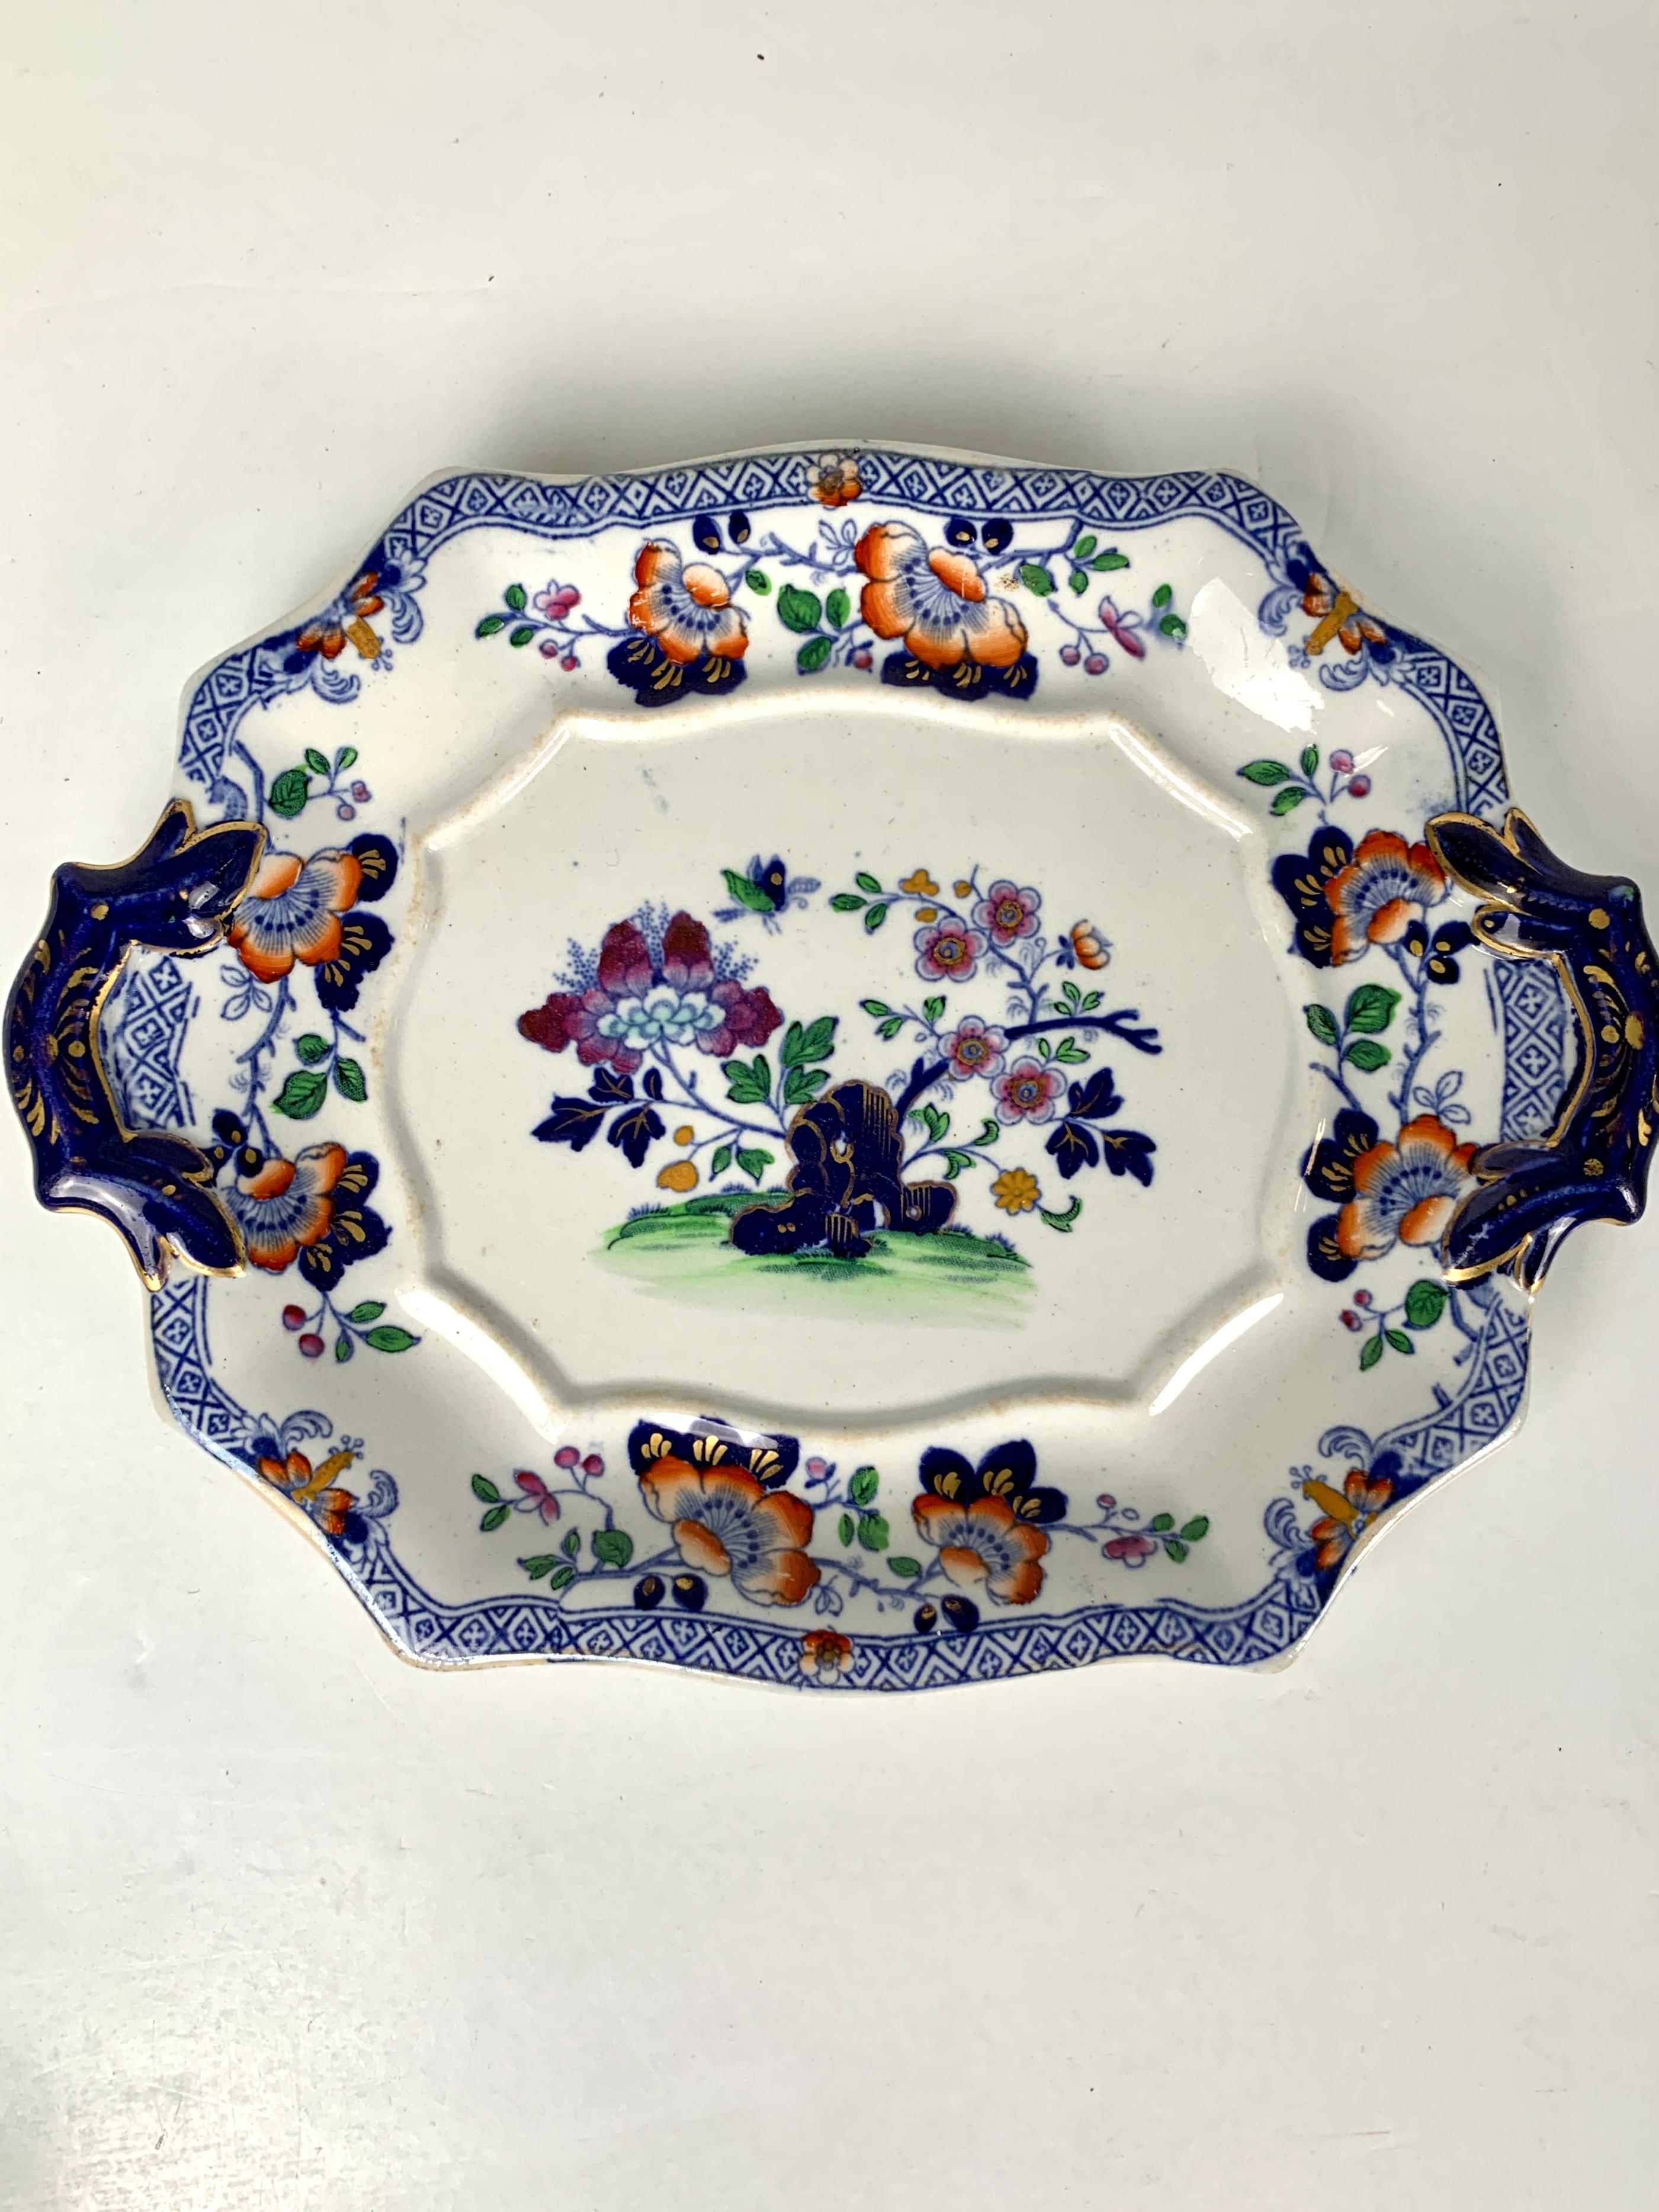 Made by Hicks and Meigh, England, circa 1820.
Separately, The pieces in the group add up to $790 plus $39 for shipping $829.
The items and prices are listed below:
Description of the group: The decoration is lovely: a butterfly hovers above a